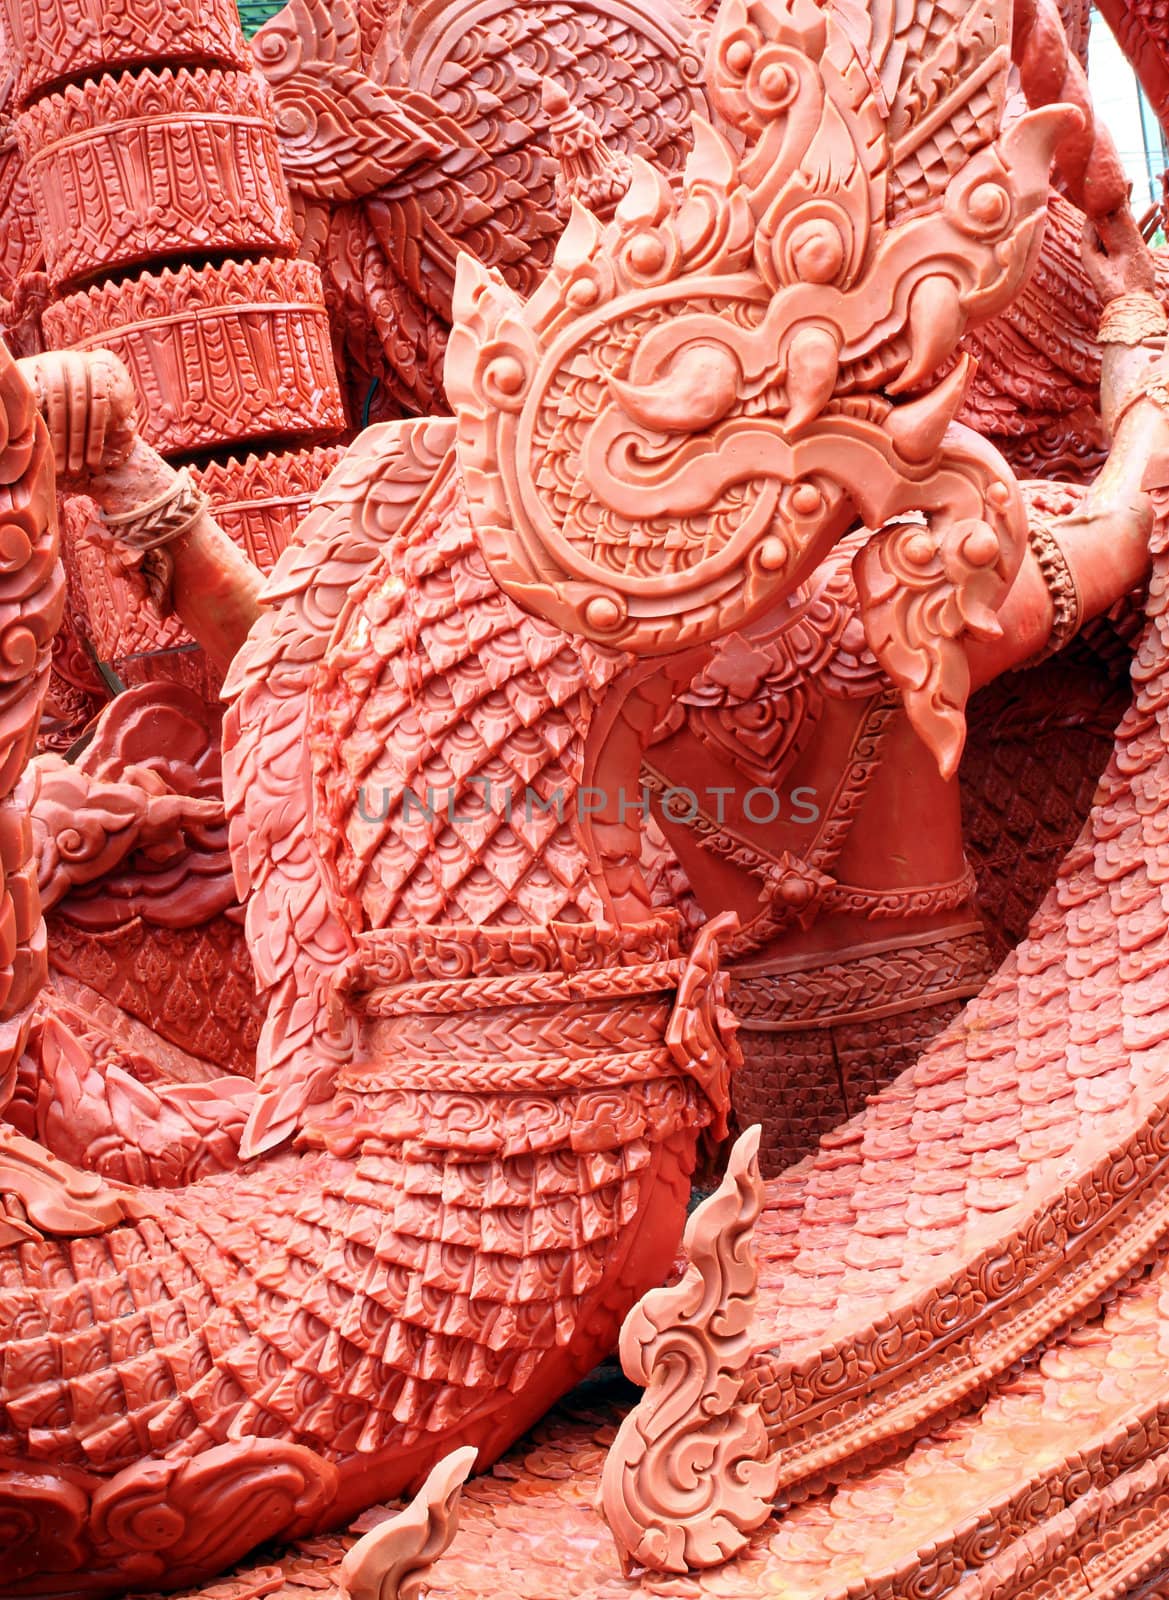 King of Naga carving candle texture festival